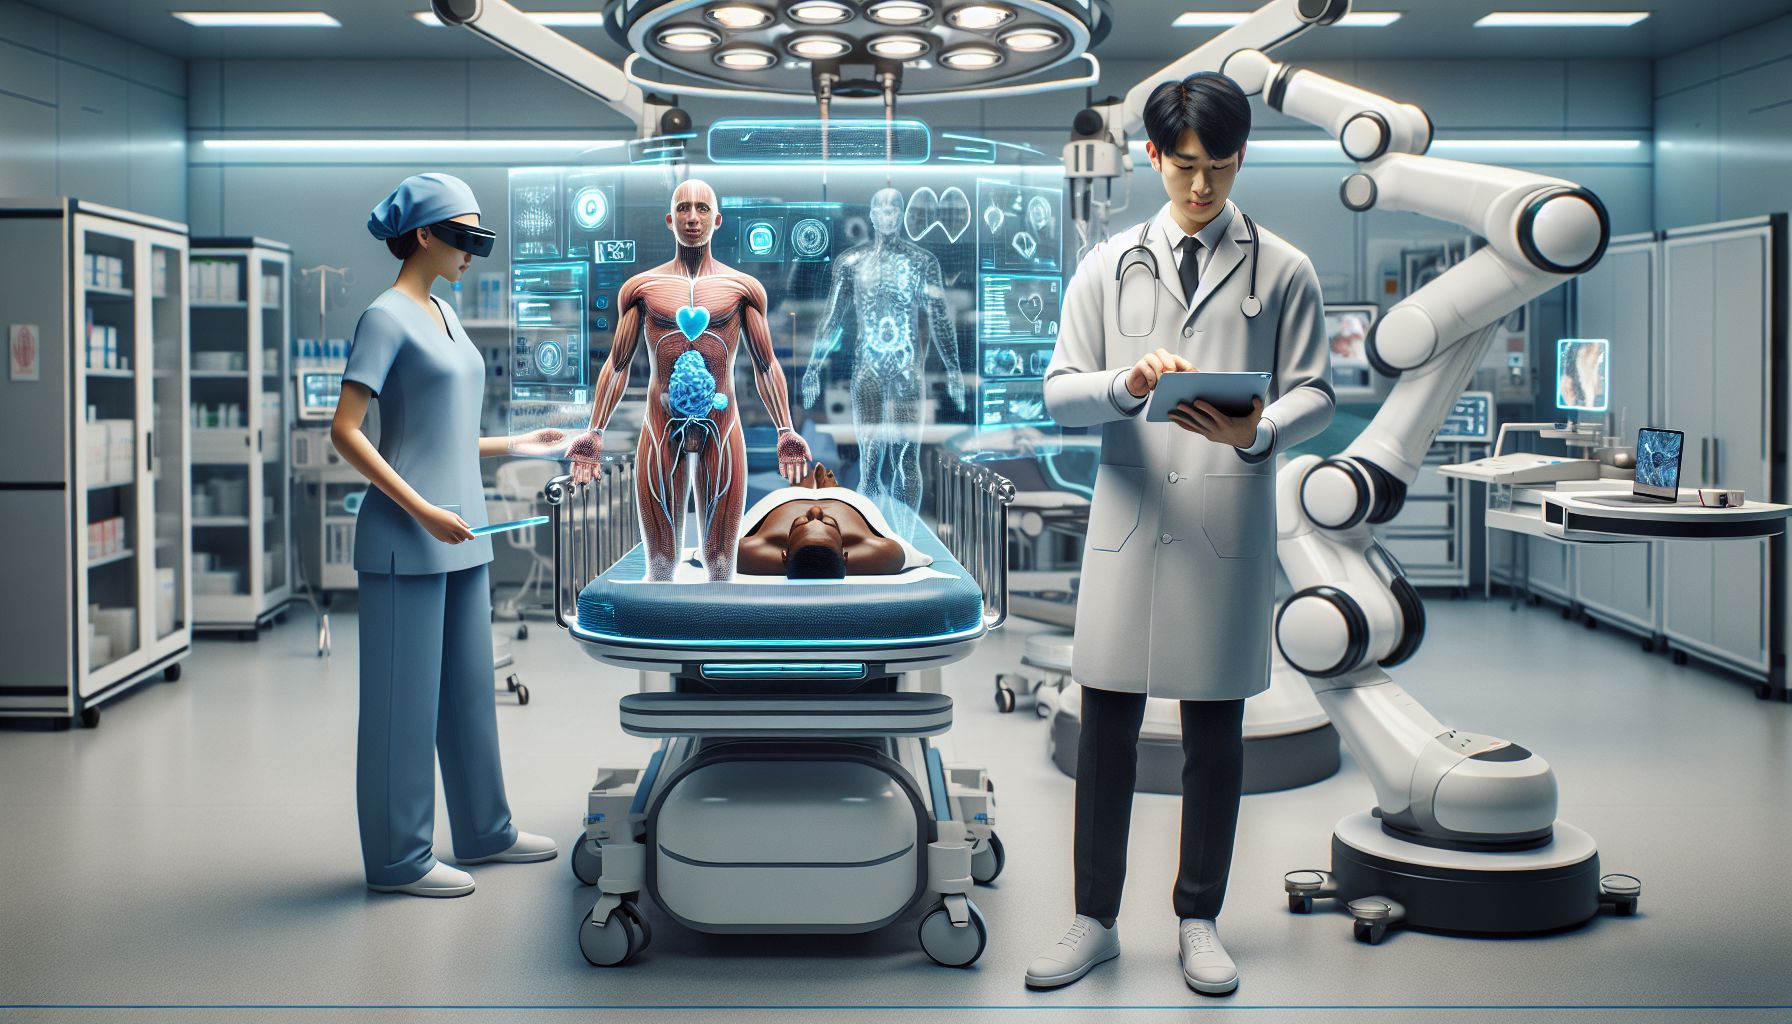 The Future of Medicine: A Glimpse into the World of Medical Technology